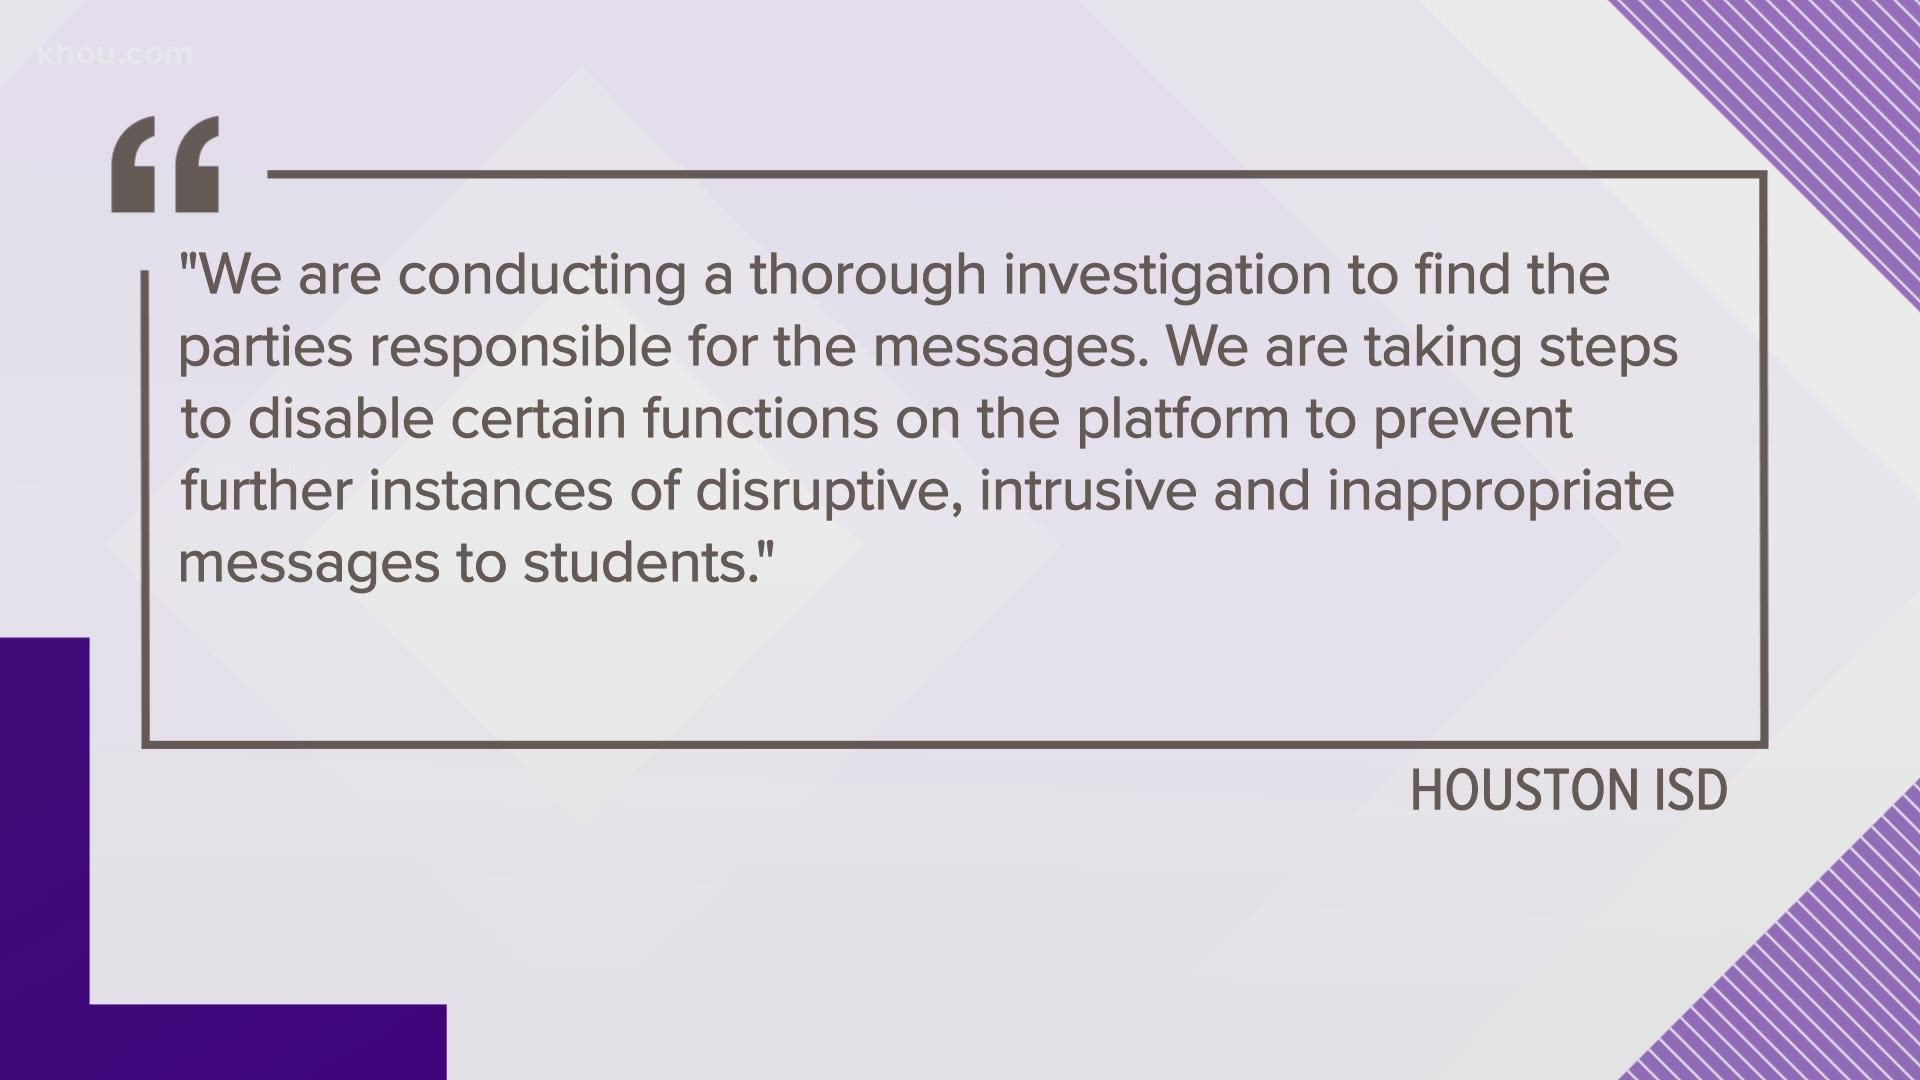 Trouble in the virtual learning world. Houston ISD is investigating inappropriate messages being sent to students on the Microsoft Teams platform.